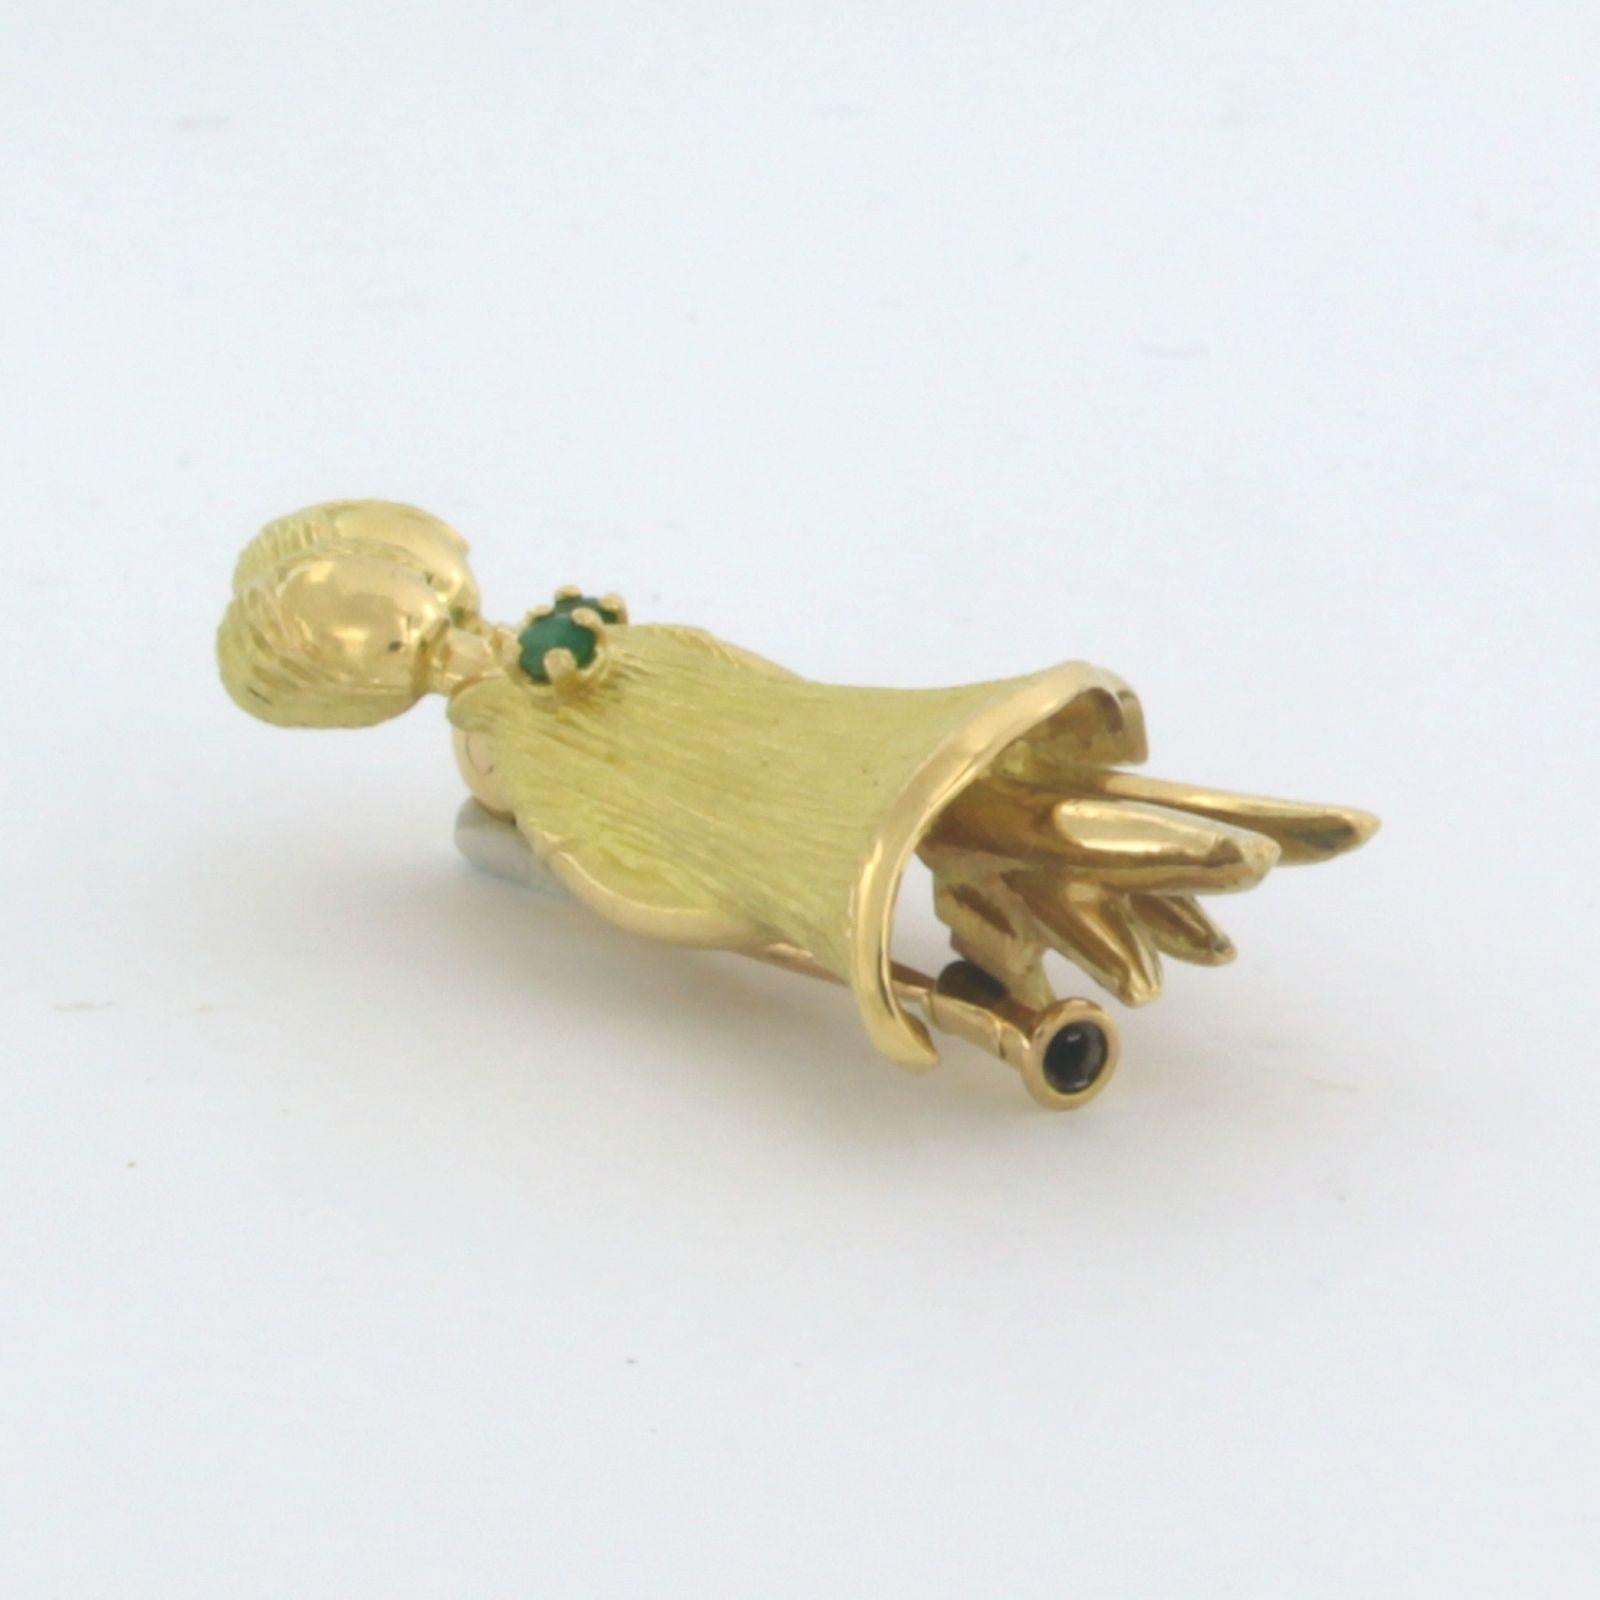 18k yellow gold brooche of two synchron dancing ladies

Detailed description:

The brooche is 4.5 cm long by 1.8 cm wide

weight 9.5 grams

Set with

- 2 x 1.7 mm round facet cut emerald

color green
clarity VS/SI
Gemstones are often treated to